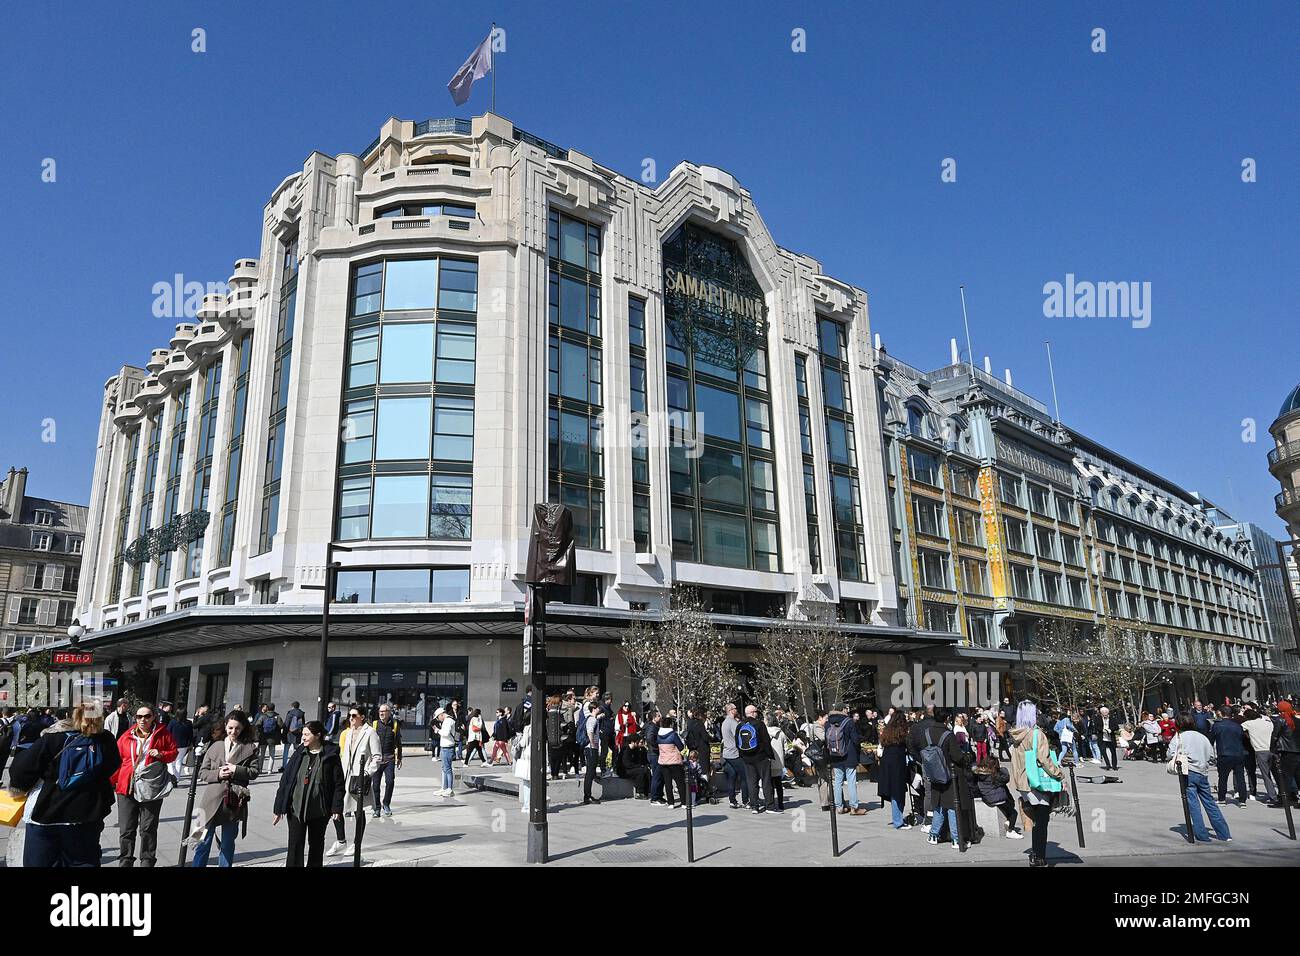 Paris La Samaritaine department store front main elevation close to the  Louvre museum located beside the river Seine sign Stock Photo - Alamy